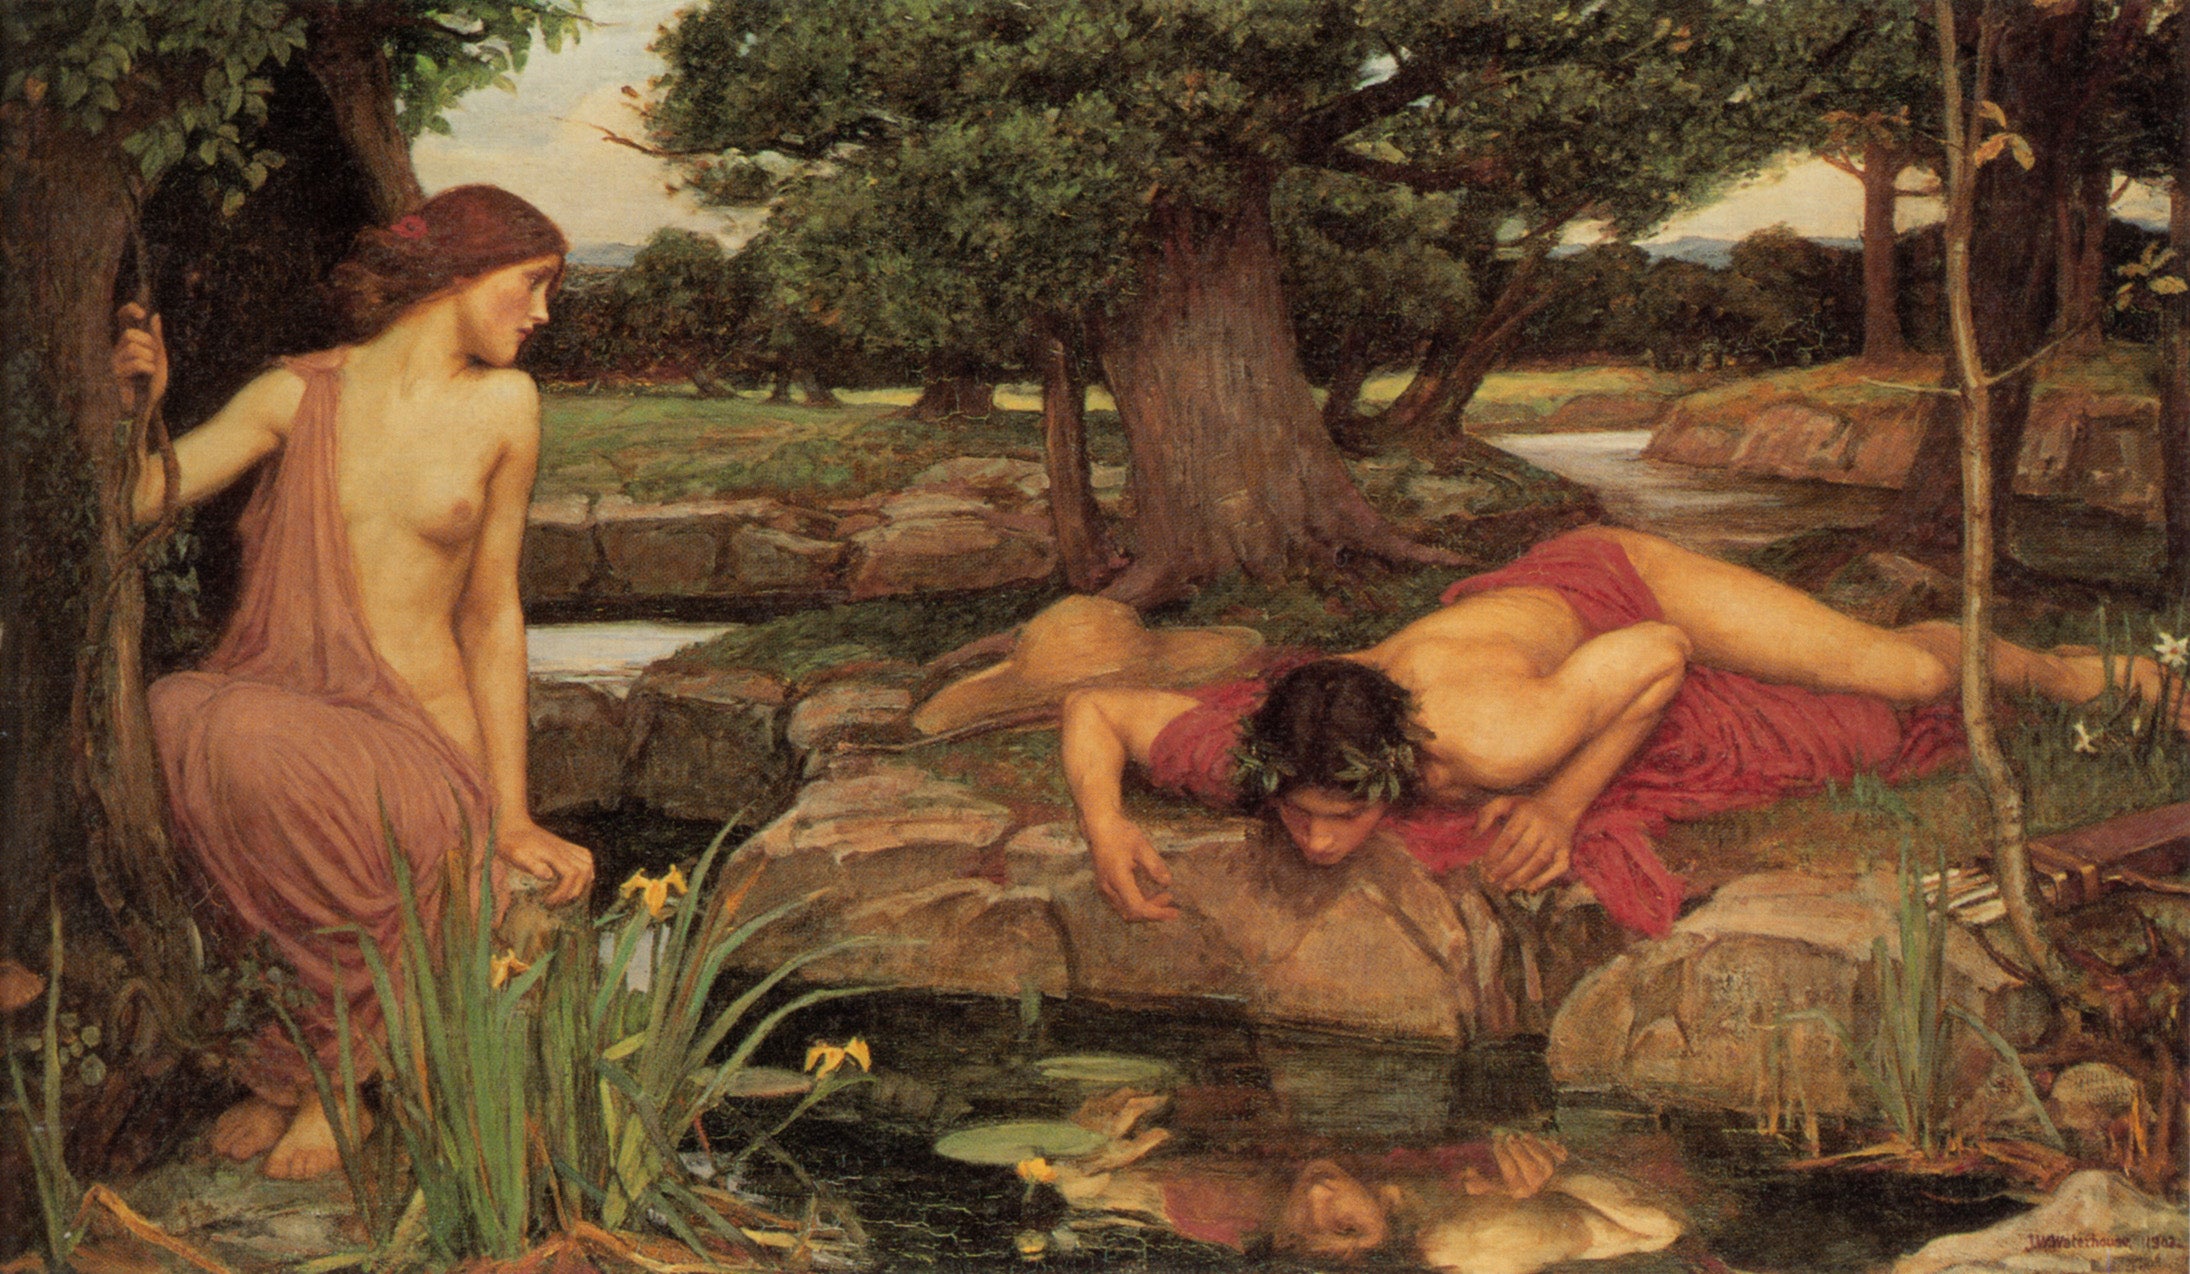 On reflection, Narcissus is a good example of where self-interest might lead you